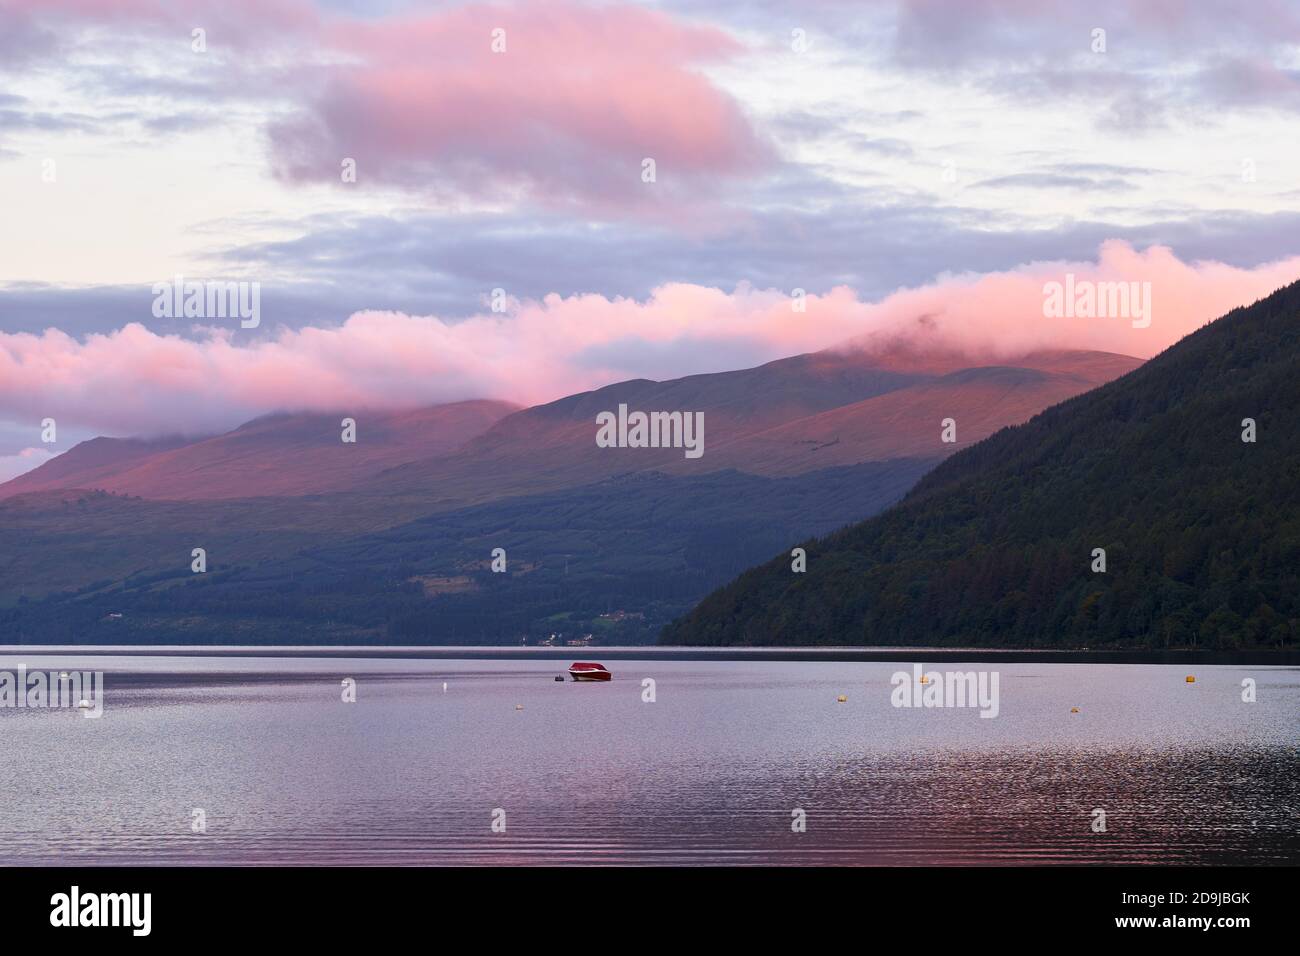 Loch Tay and Ben Lawers viewed from Kenmore, Perth and Kinross, Scotland. Stock Photo